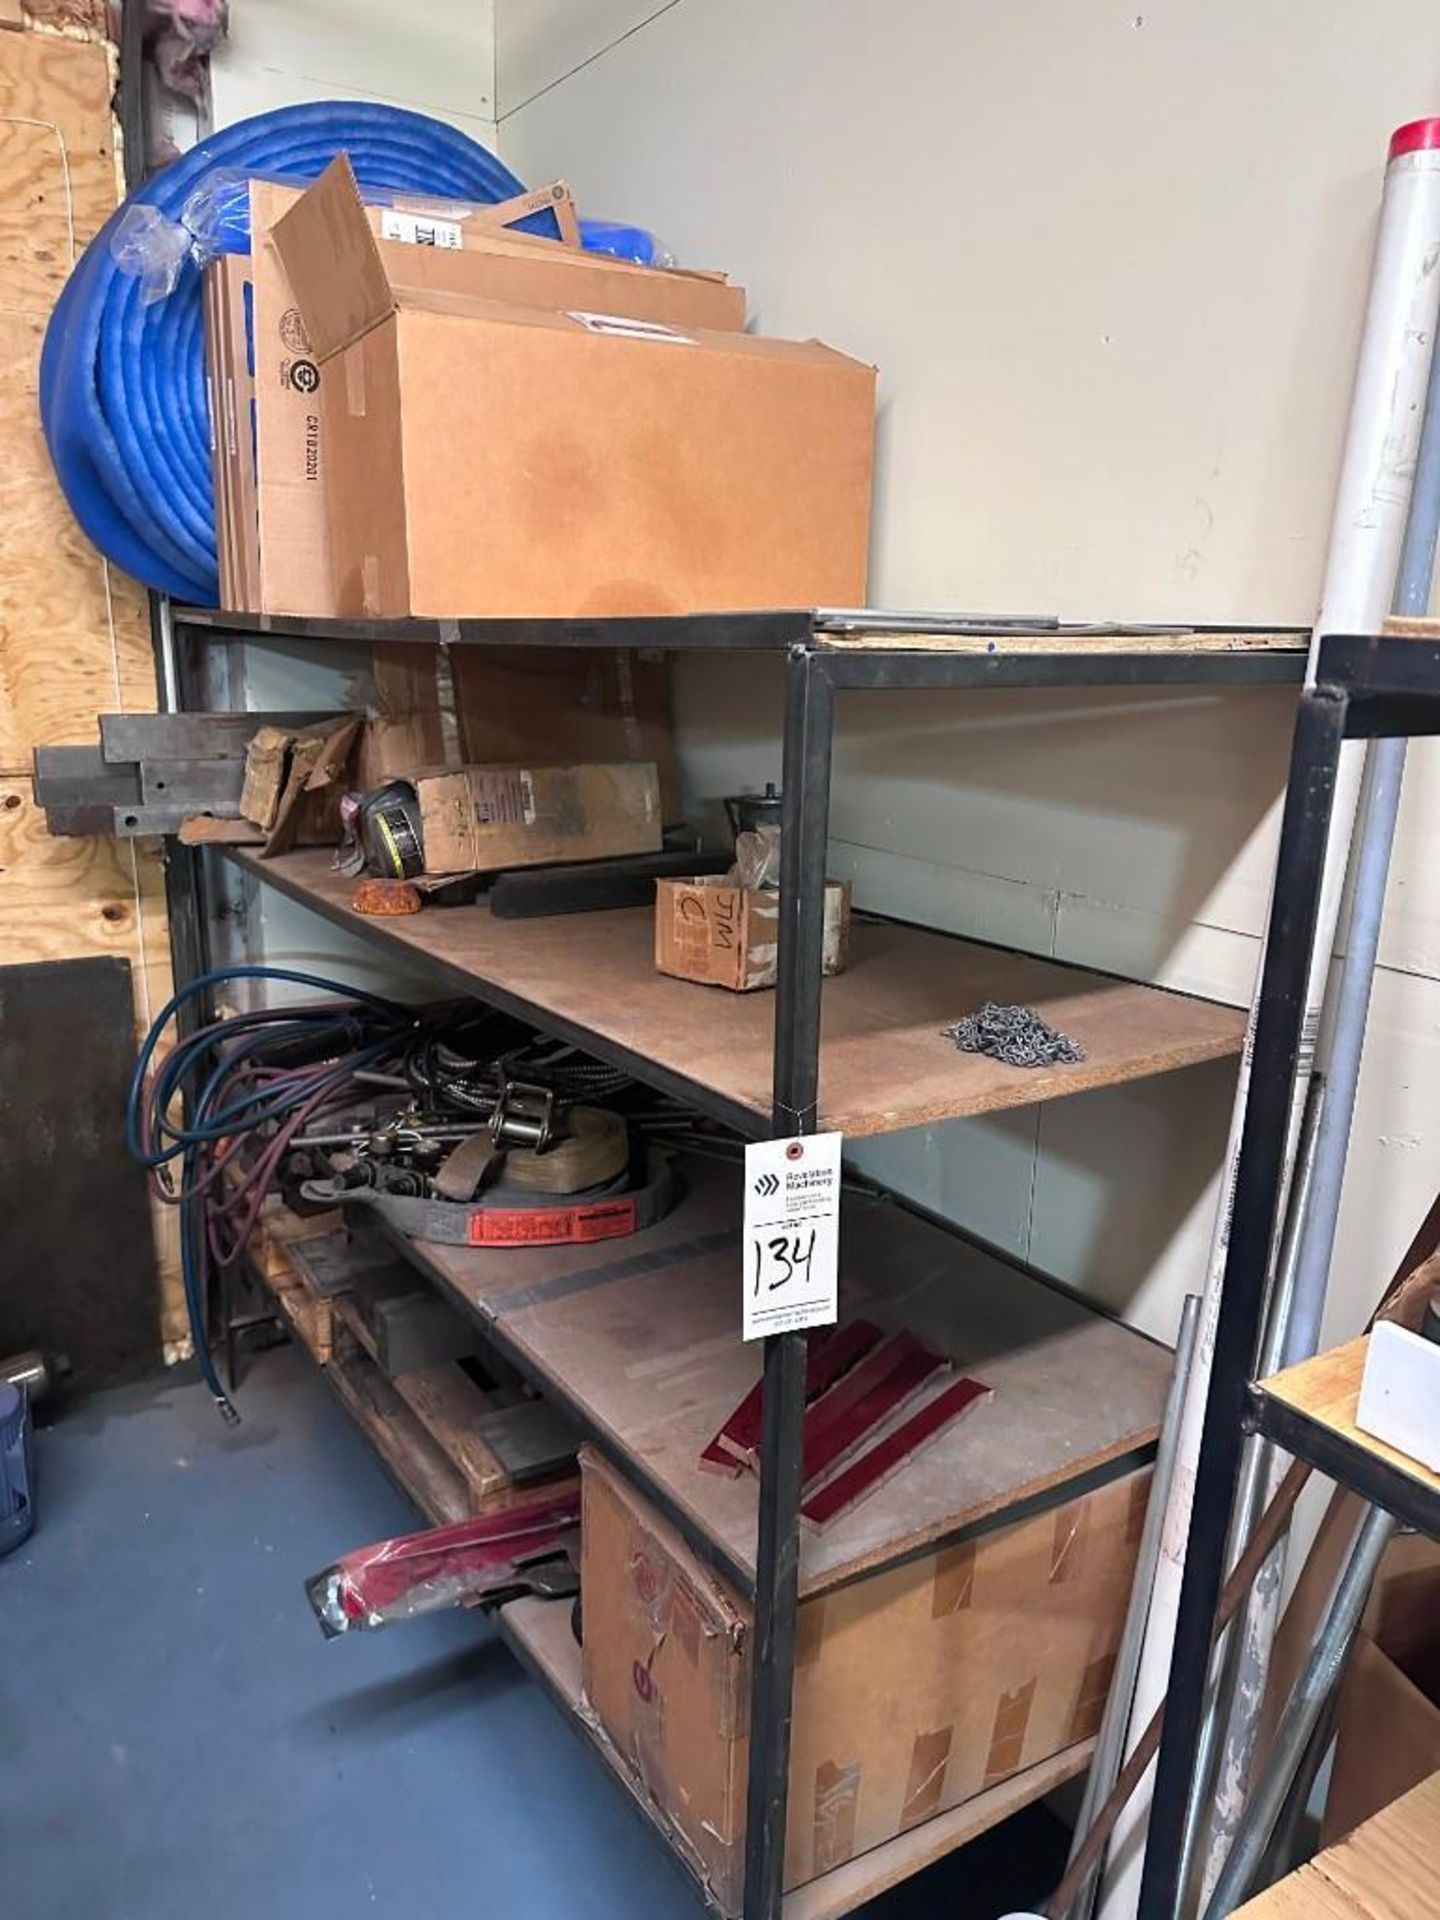 STEEL SHELVING UNIT WITH CONTENTS, SPARE PARTS, STOCK MATERIAL